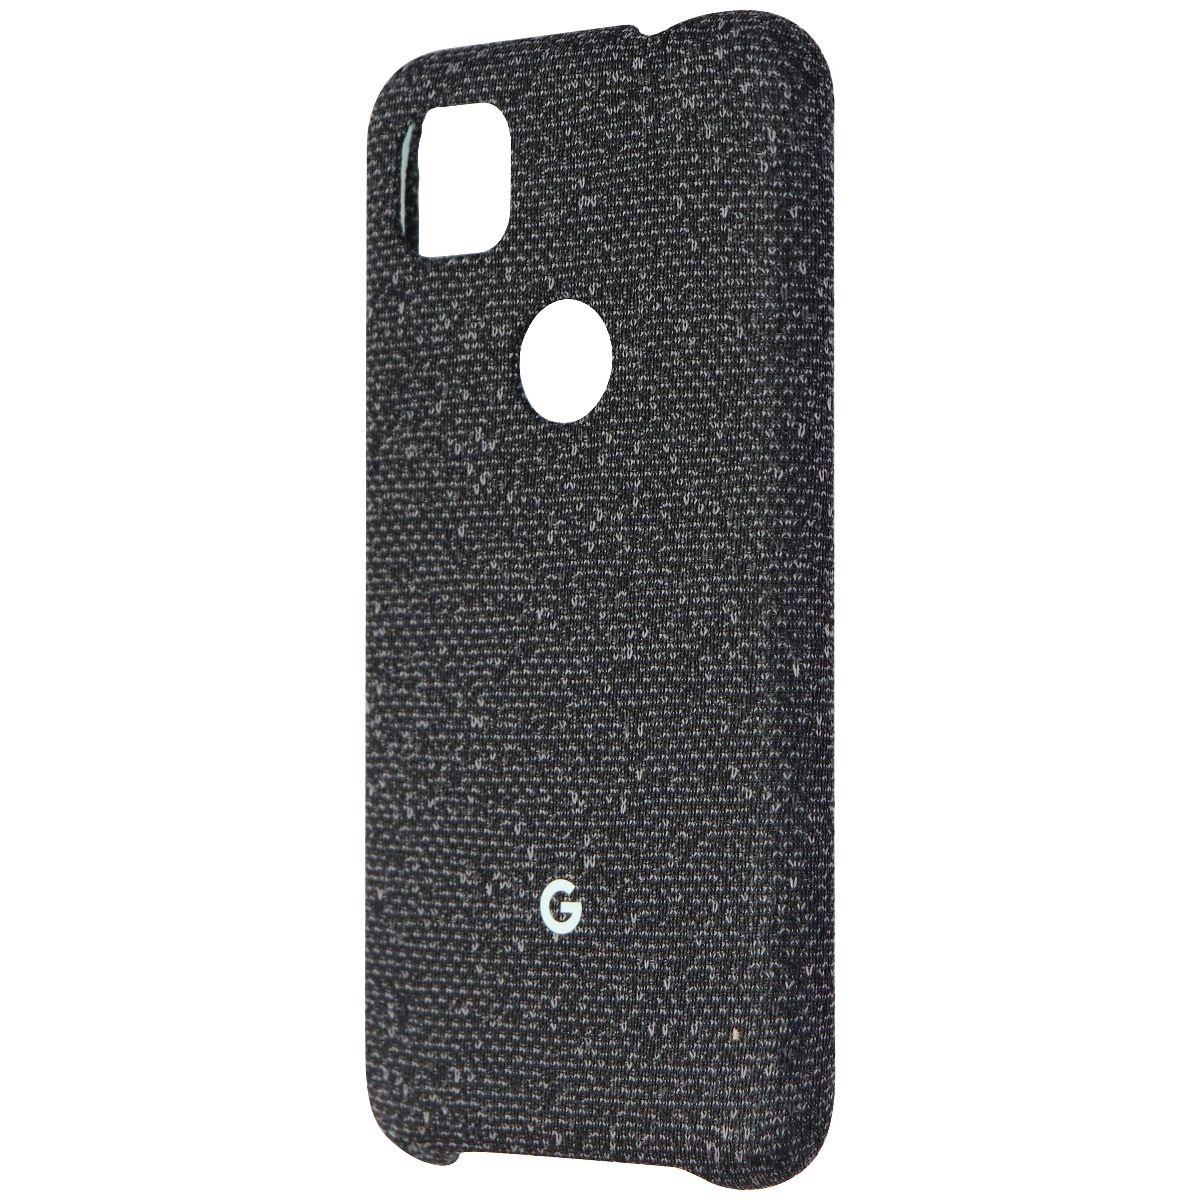 Official Google Fabric Case For Pixel 4a Smartphones - Basically Black (GA02056)